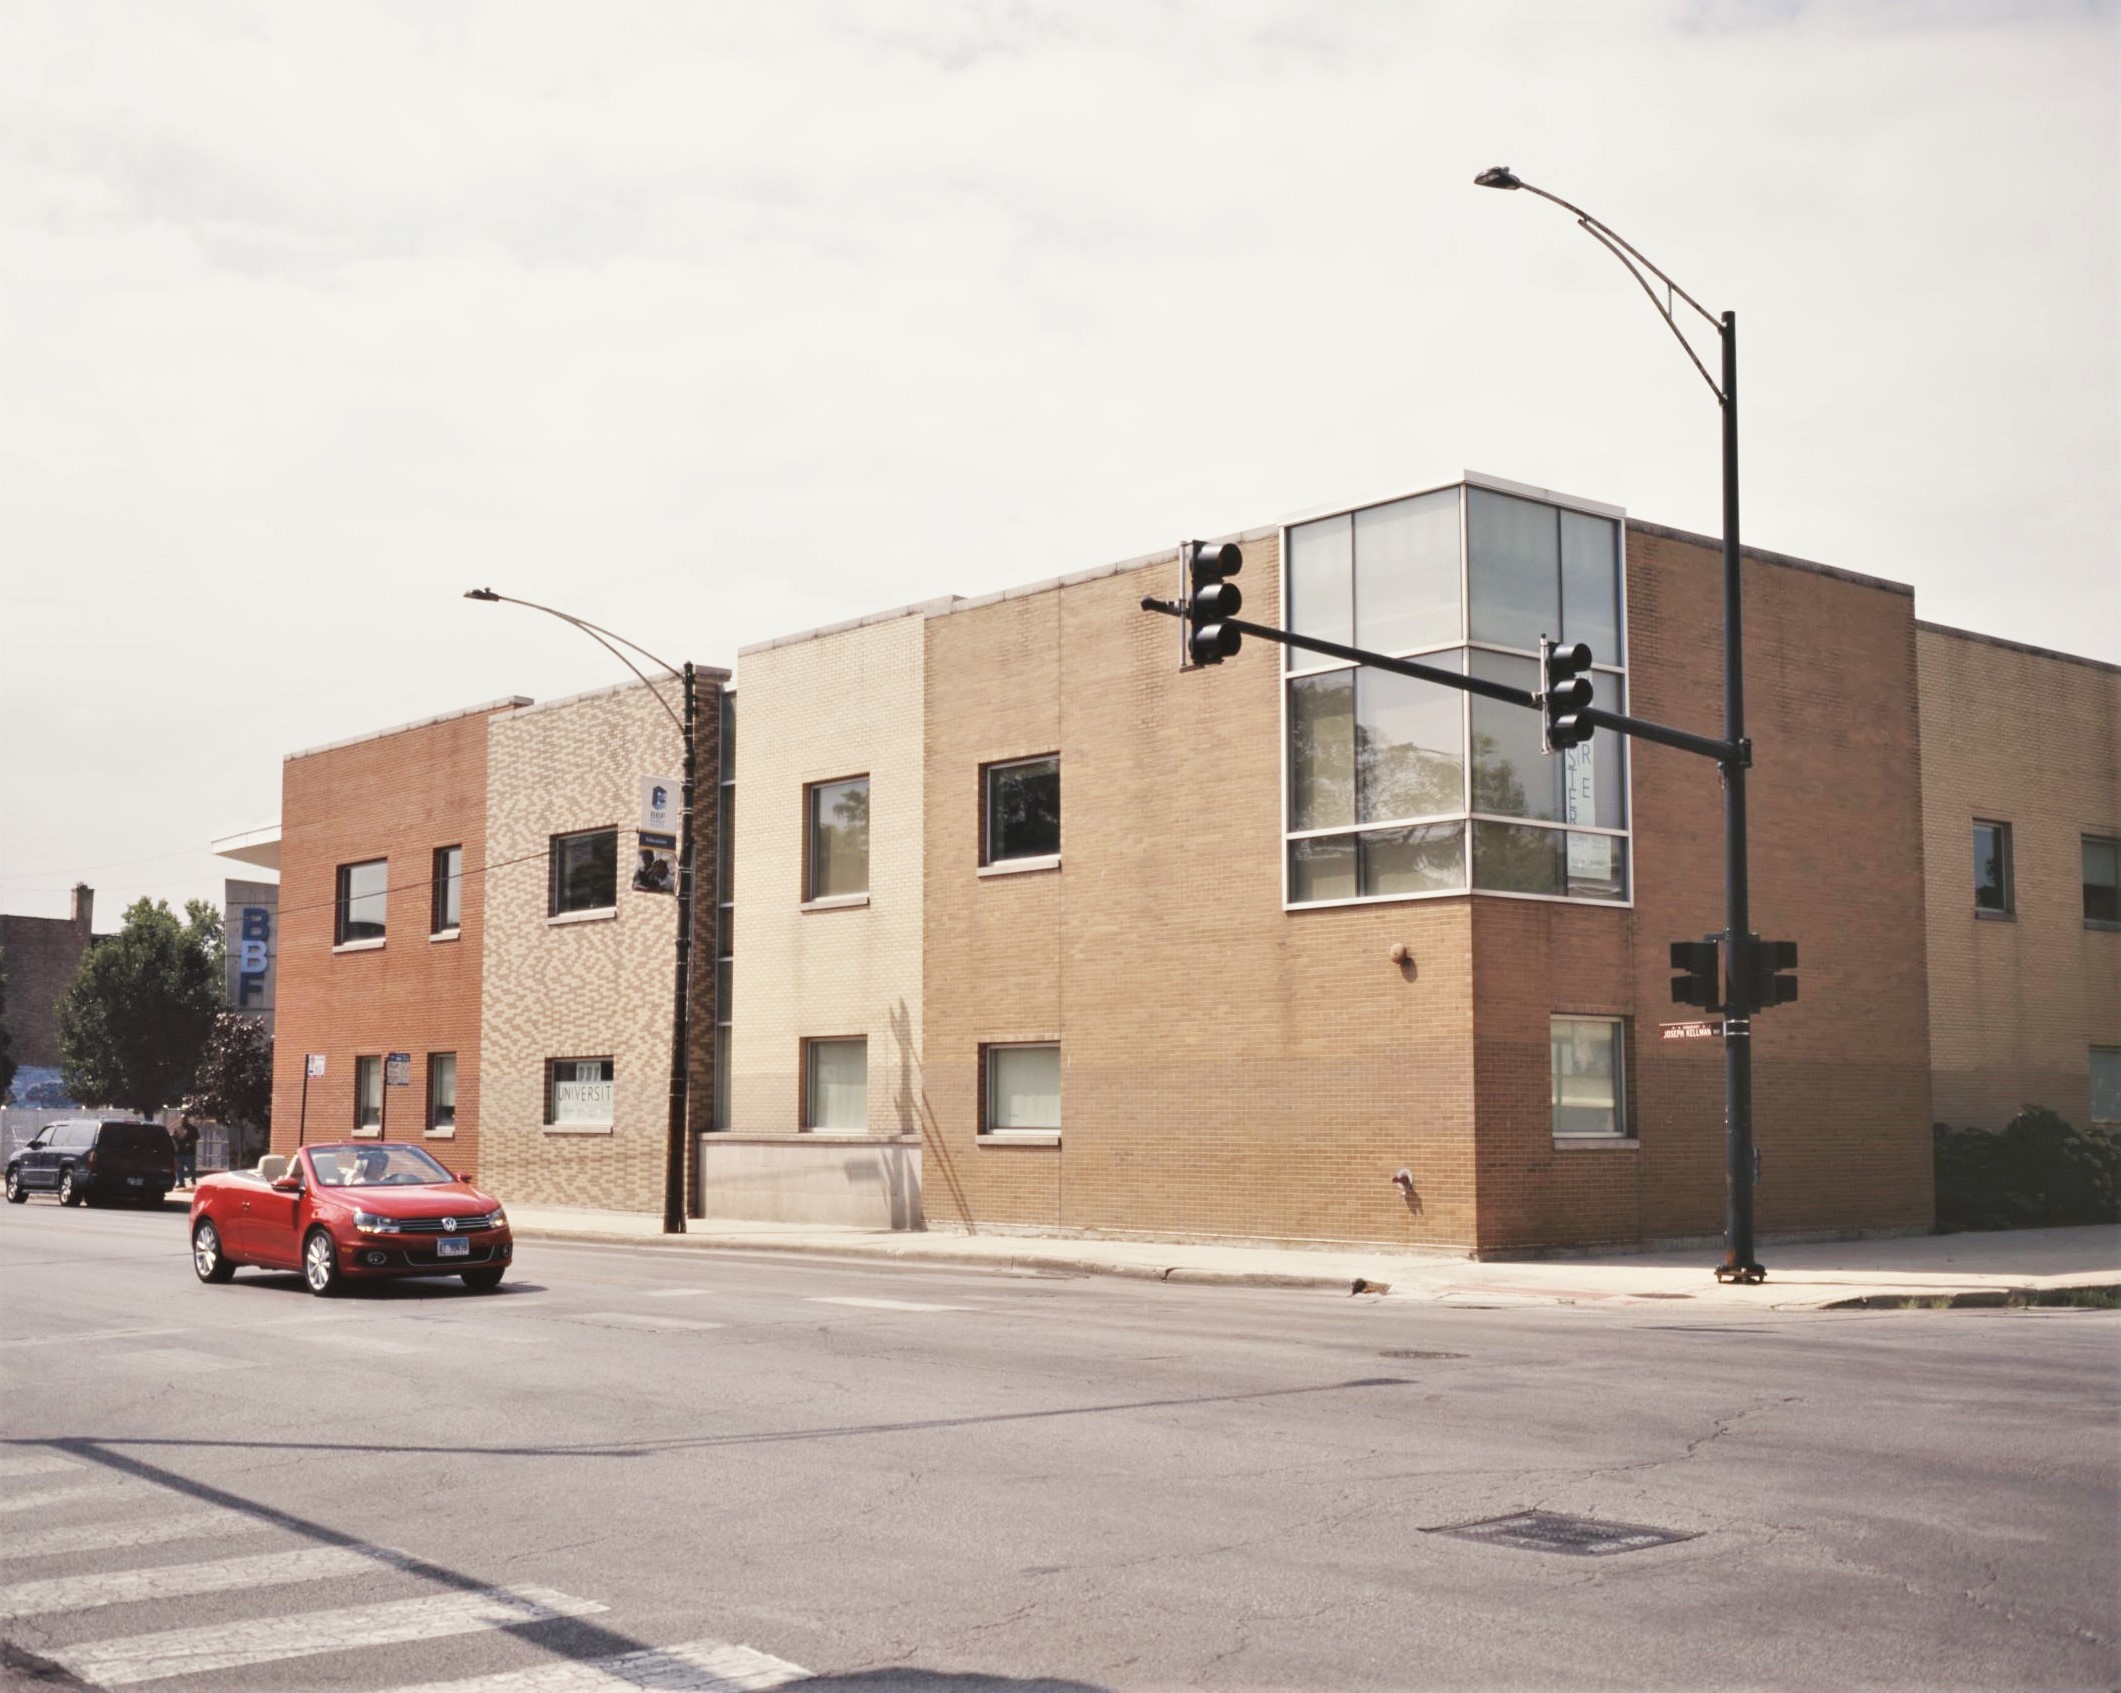 Image: The BBF Family Services Center, seen on a sunny day from the NE corner of 15th and Pulaski in North Lawndale. Designed by architect Lucien Lagrange, the building’s long, two-story play-block facade varies in dimension and brick pattern from end to end. A red Volkswagen cabriolet with the top down is stopped momentarily at the light in front of the building. Photo by Eric K. Roberts.